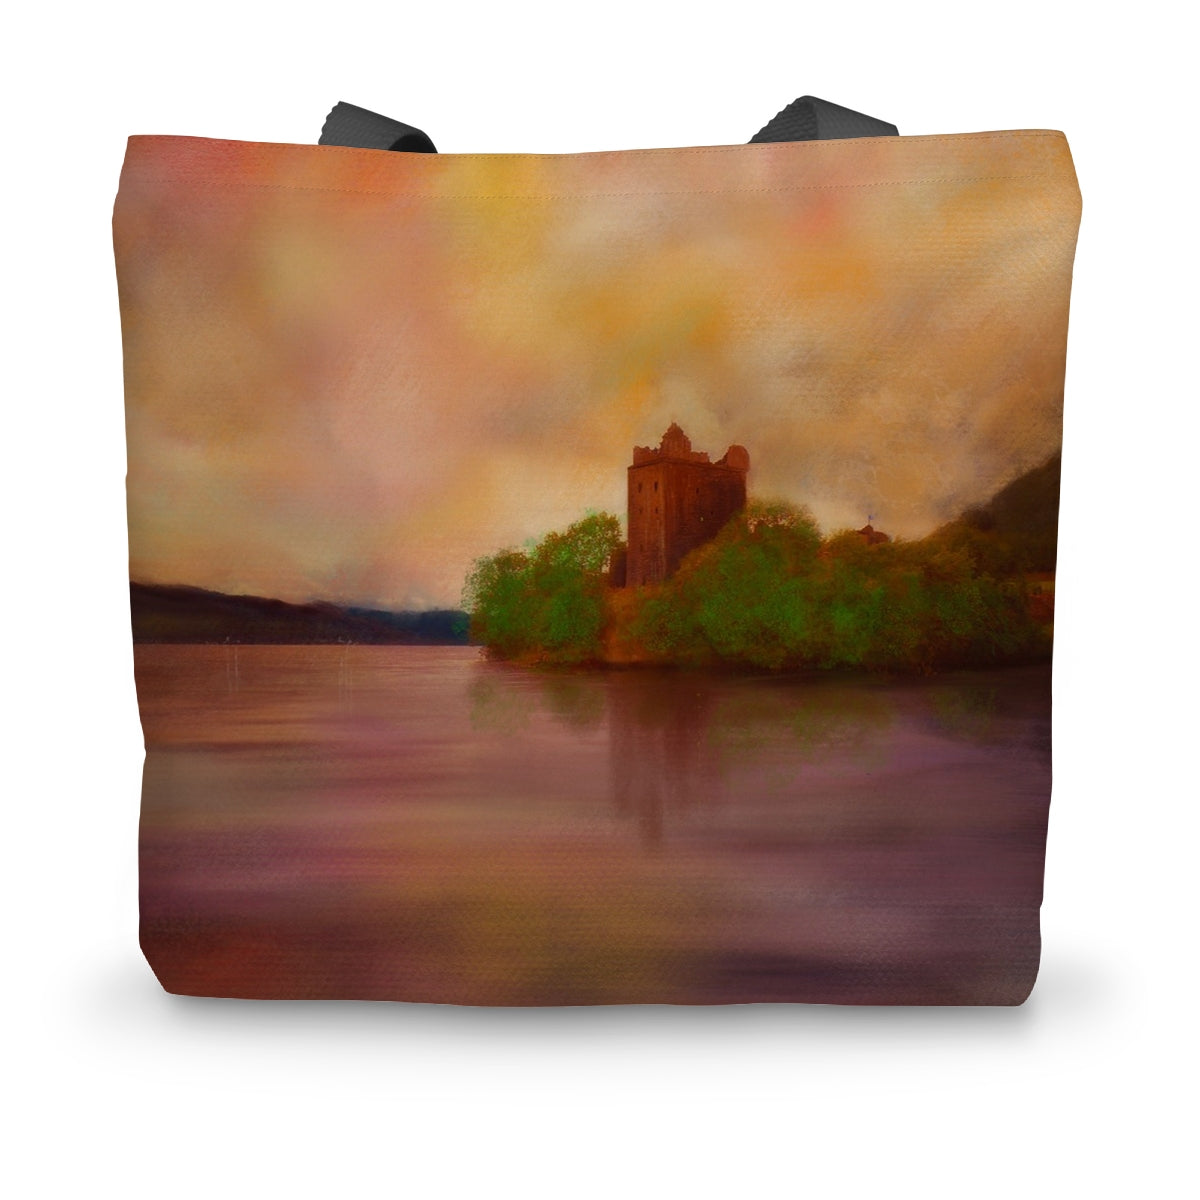 Urquhart Castle Art Gifts Canvas Tote Bag-Bags-Historic & Iconic Scotland Art Gallery-14"x18.5"-Paintings, Prints, Homeware, Art Gifts From Scotland By Scottish Artist Kevin Hunter